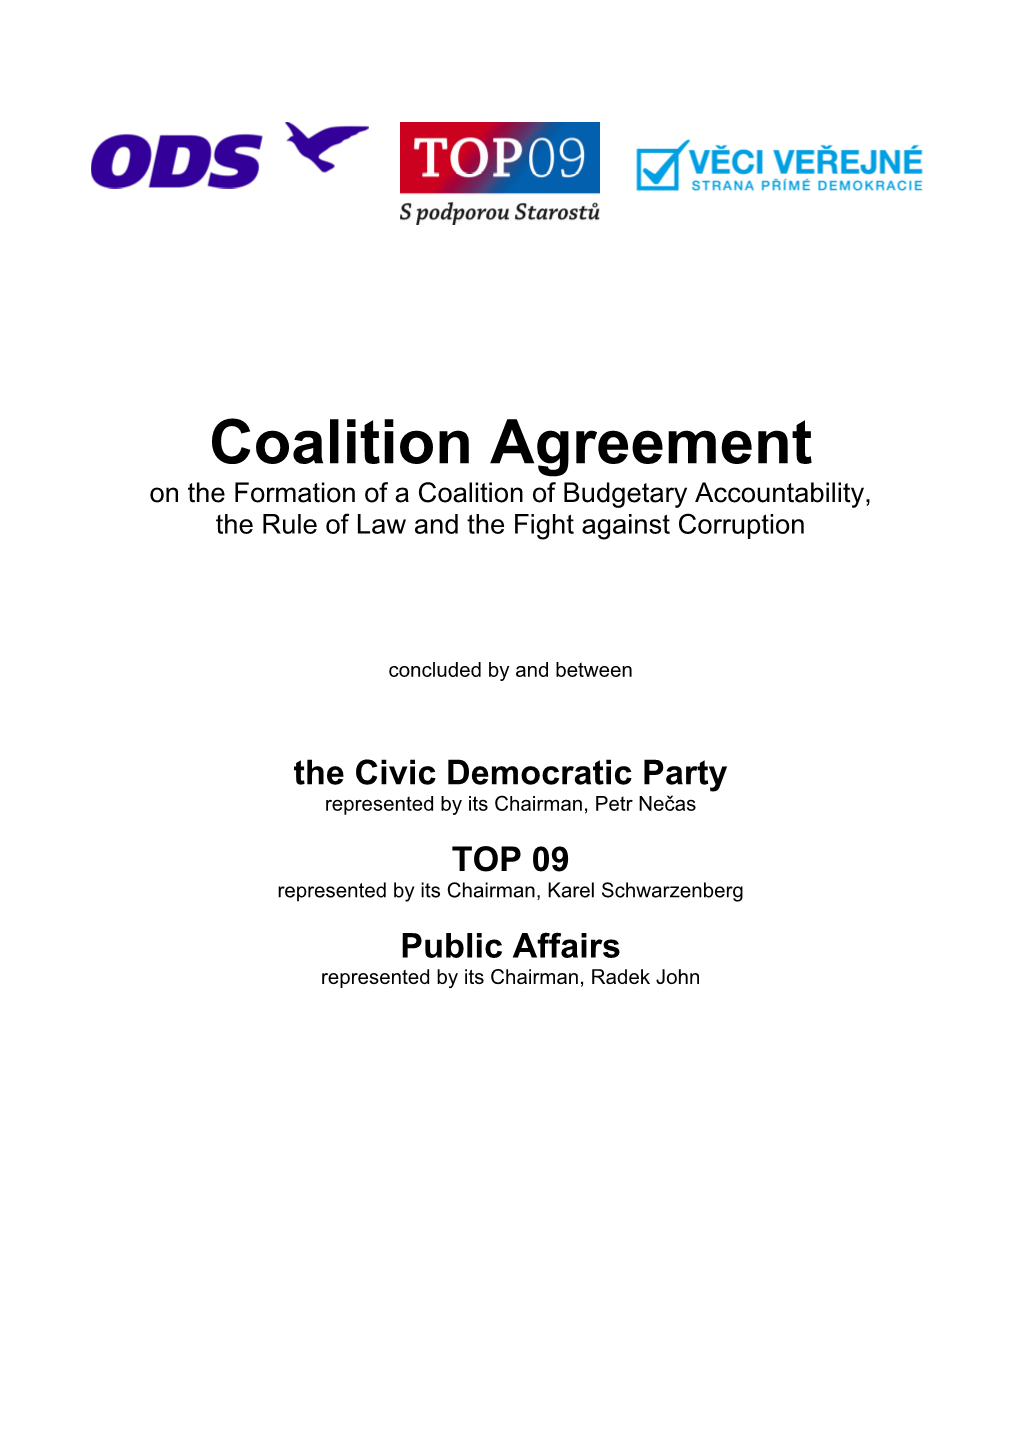 Coalition Agreement on the Formation of a Coalition of Budgetary Accountability, the Rule of Law and the Fight Against Corruption